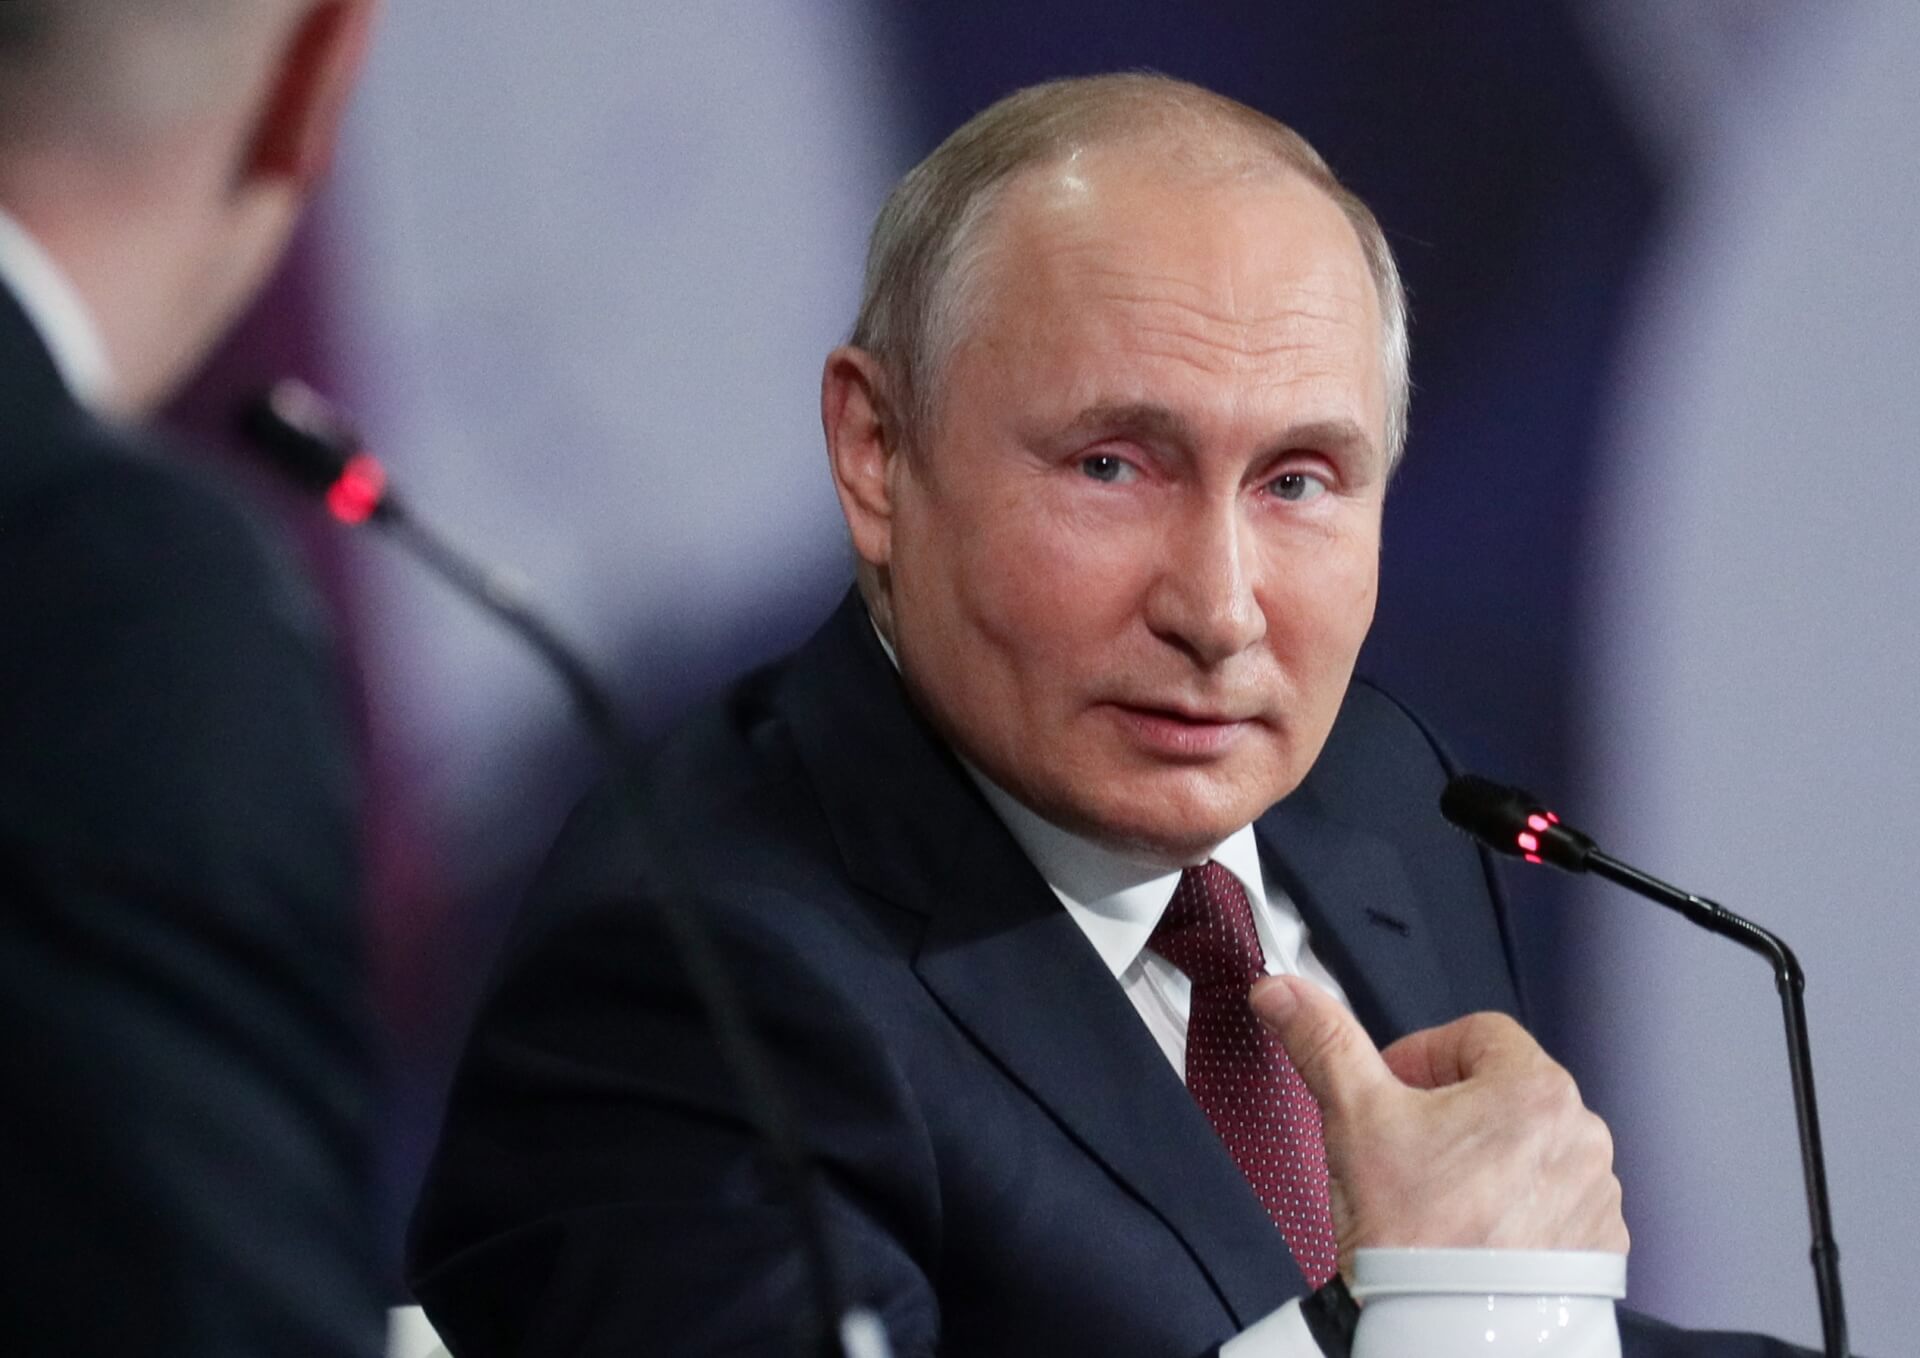 Putin Places Nuclear Weapons on ‘High Alert’ Despite Agreeing to Peace Talks